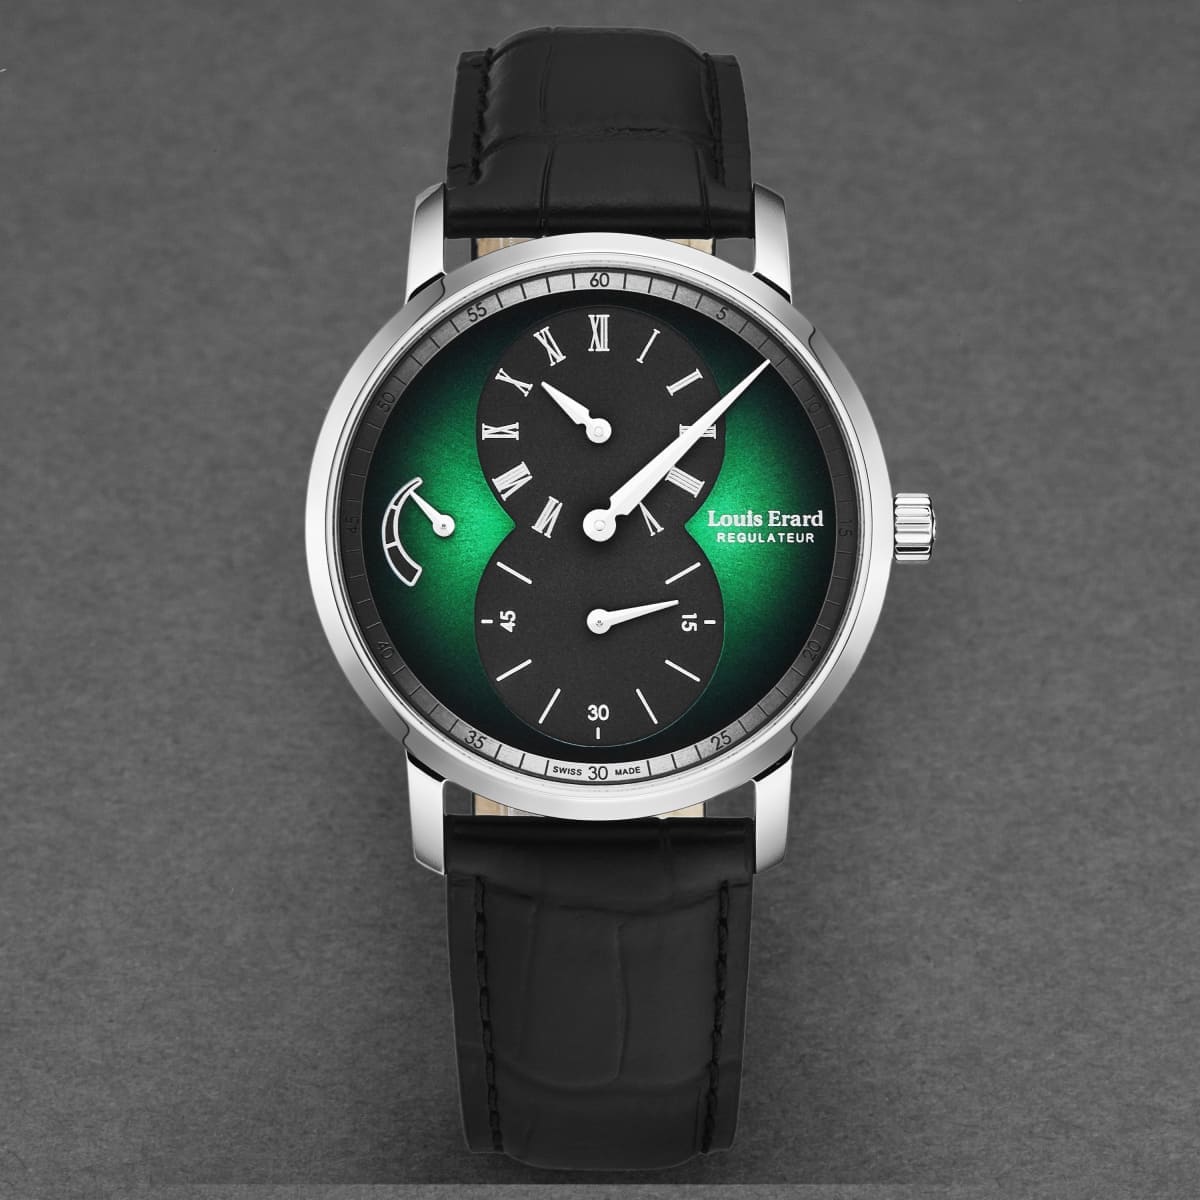 Louis Erard Men’s ’Excellence’ Green/Black Dial Black Leather Strap Manual Wind Watch 54230AG59.BDC02 - On sale